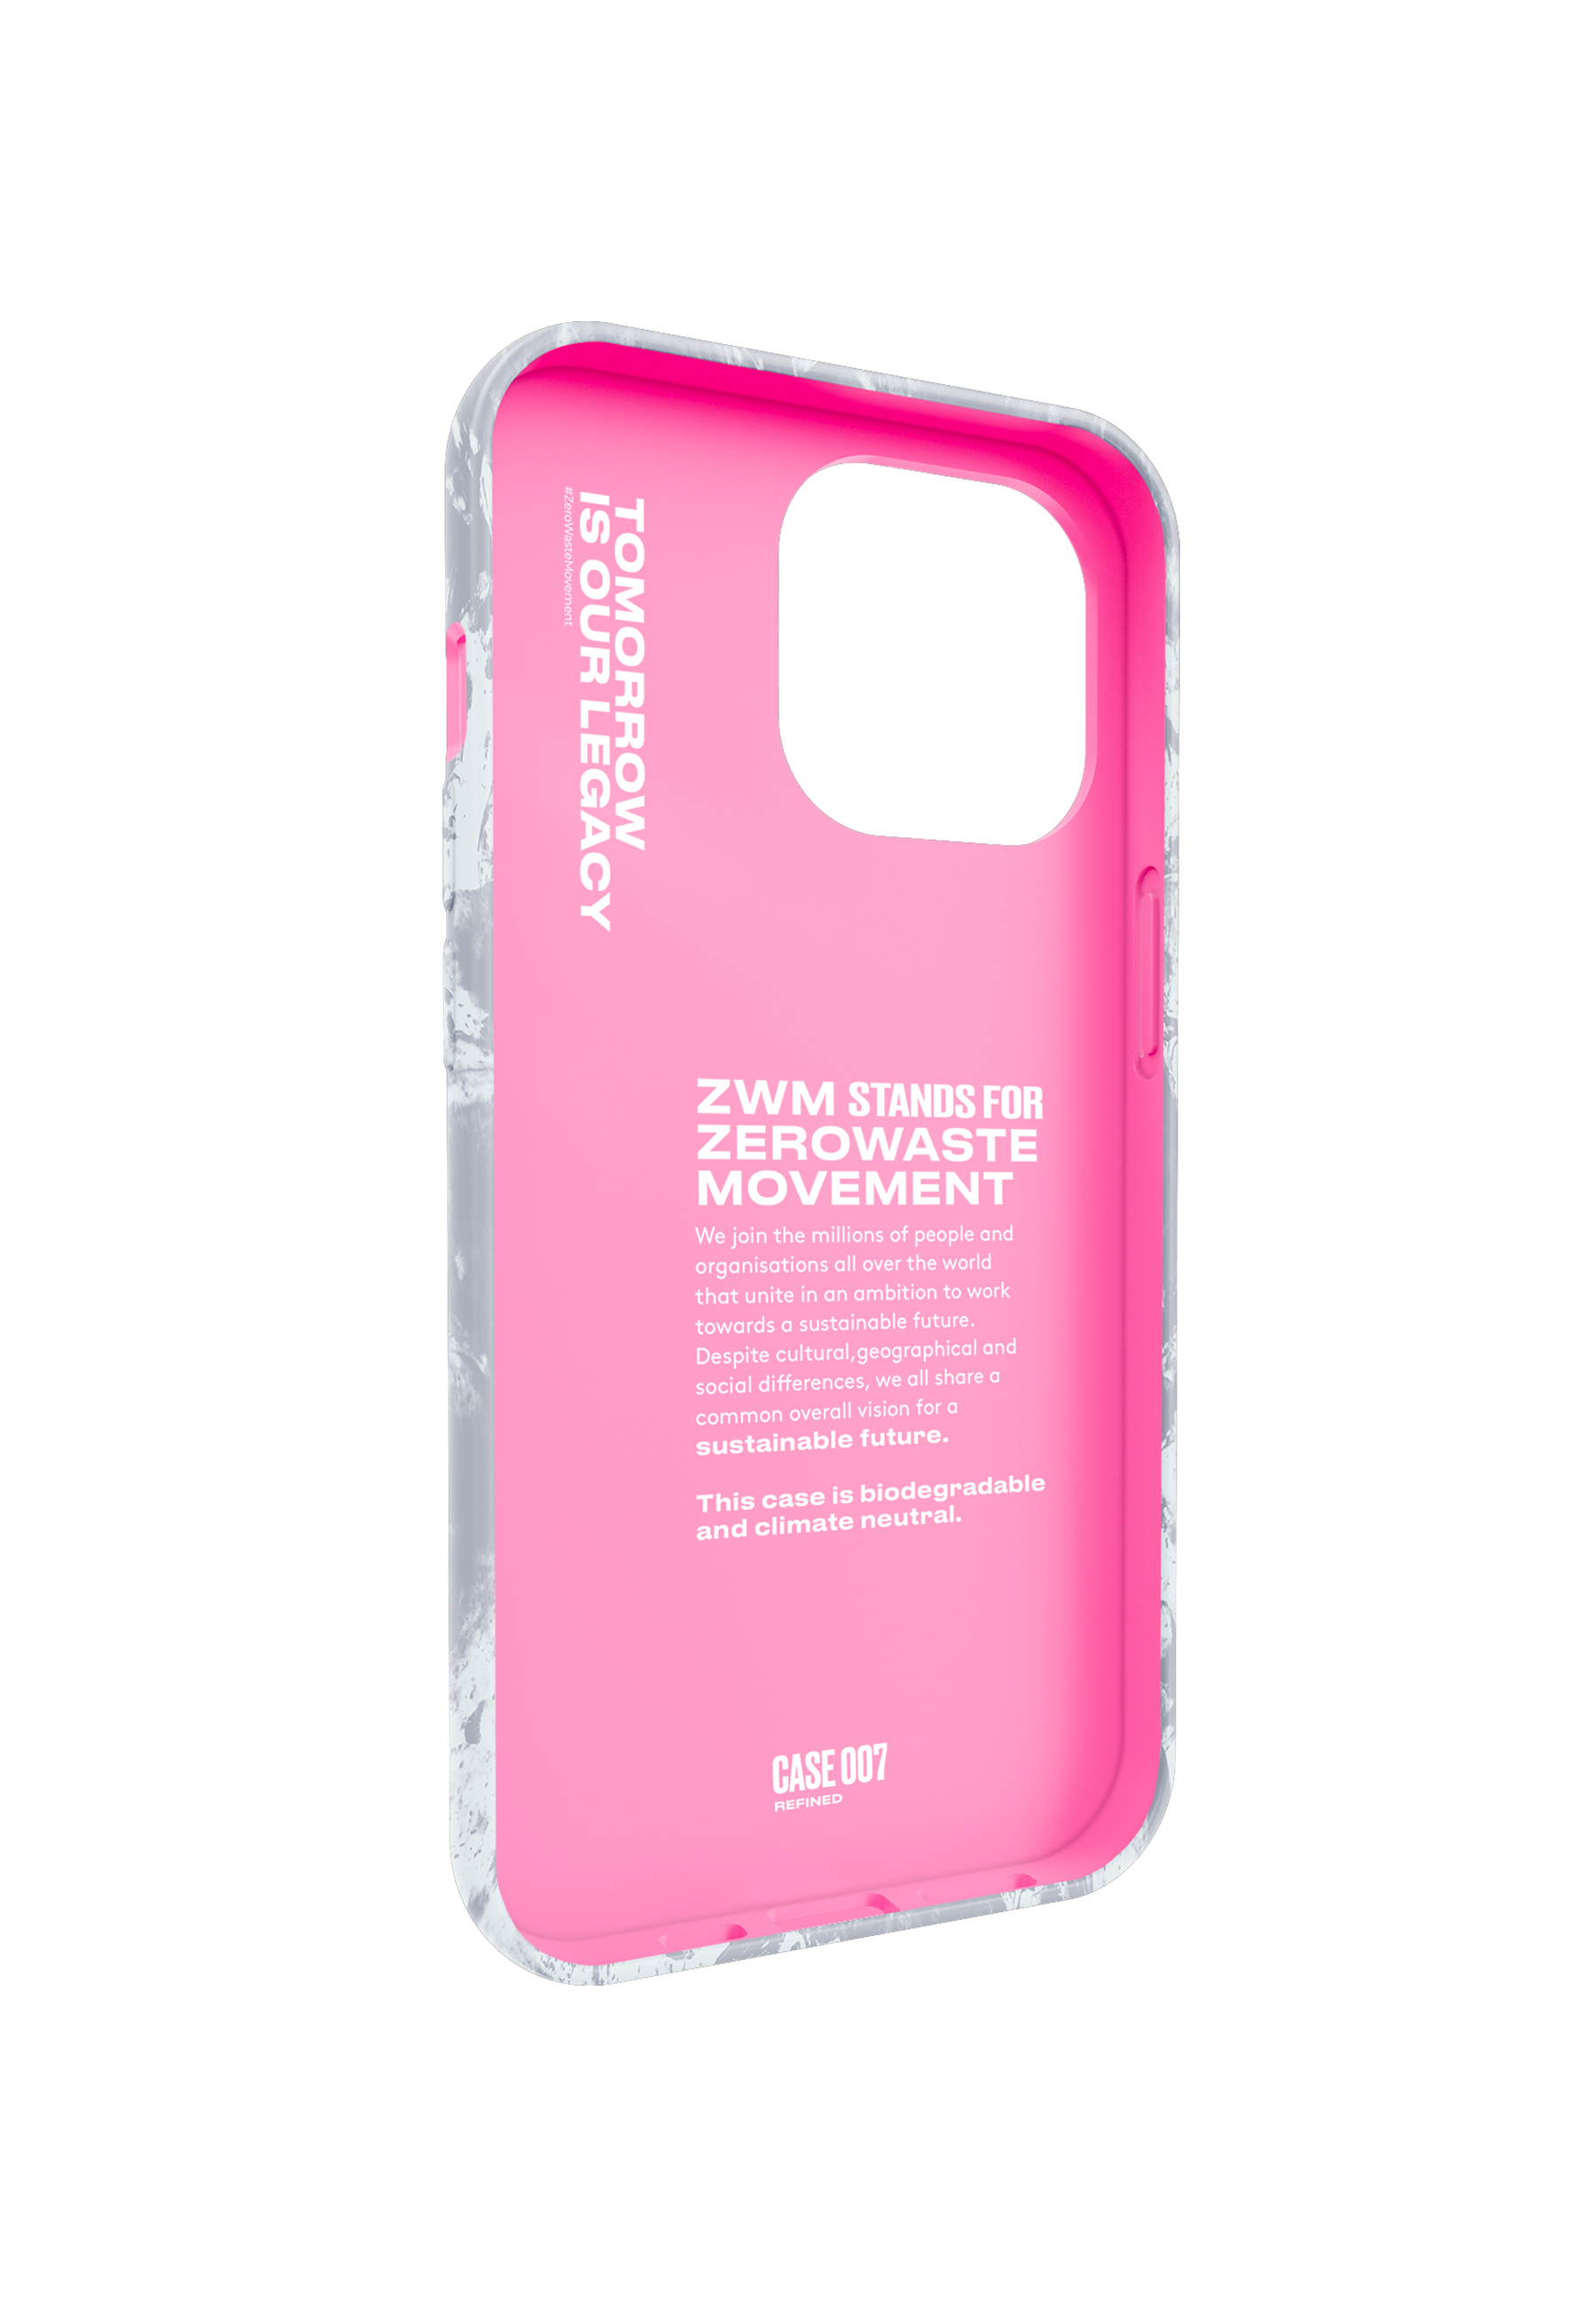 _13PM, 12/12 Pro, iPhone ZWM gray/pink Backcover, Apple,